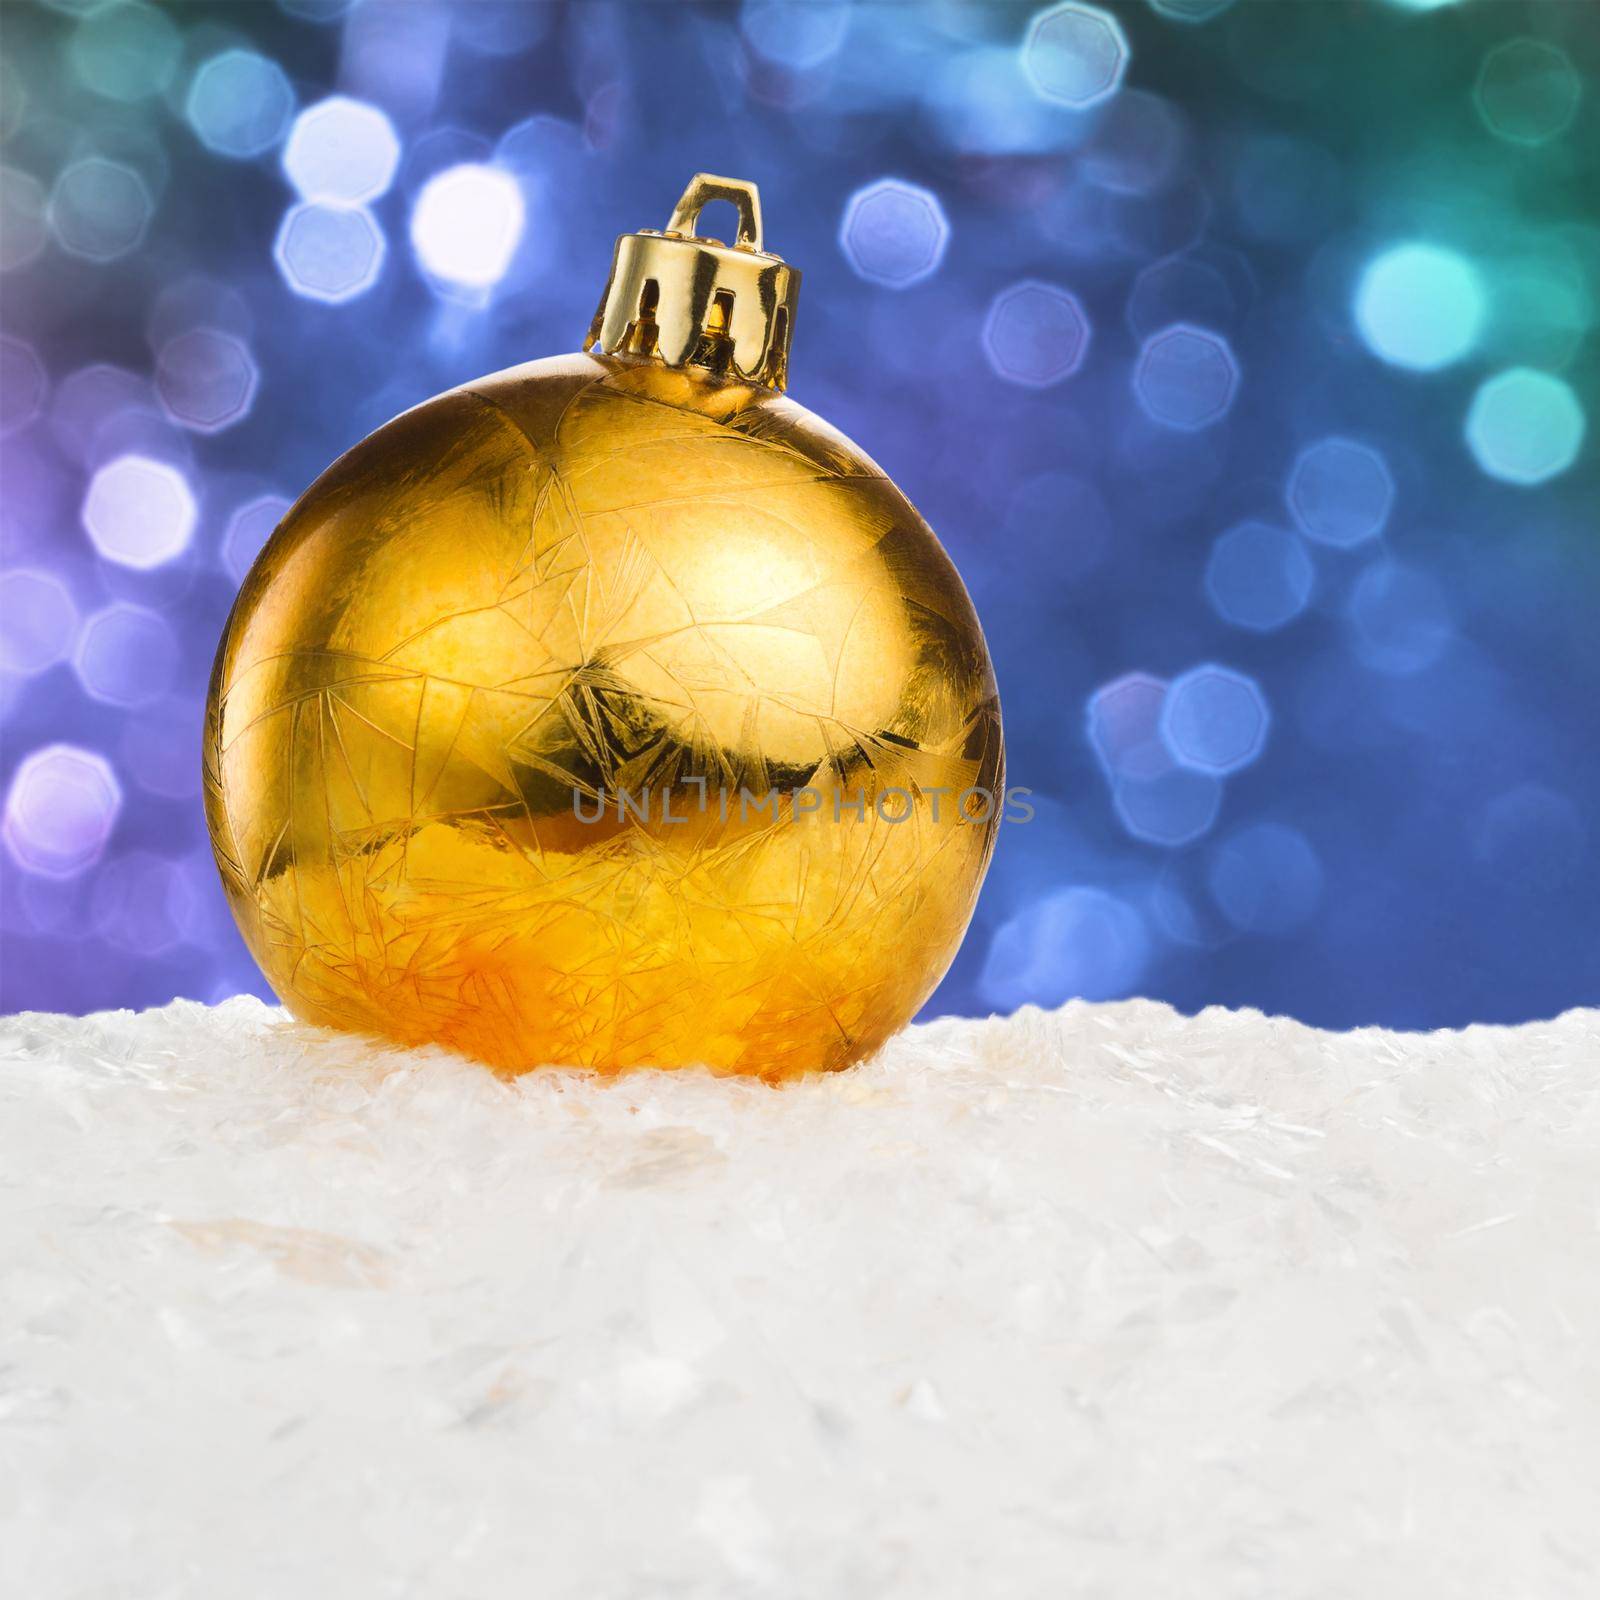 Golden Christmas ball on snow over blue festive background with copy space